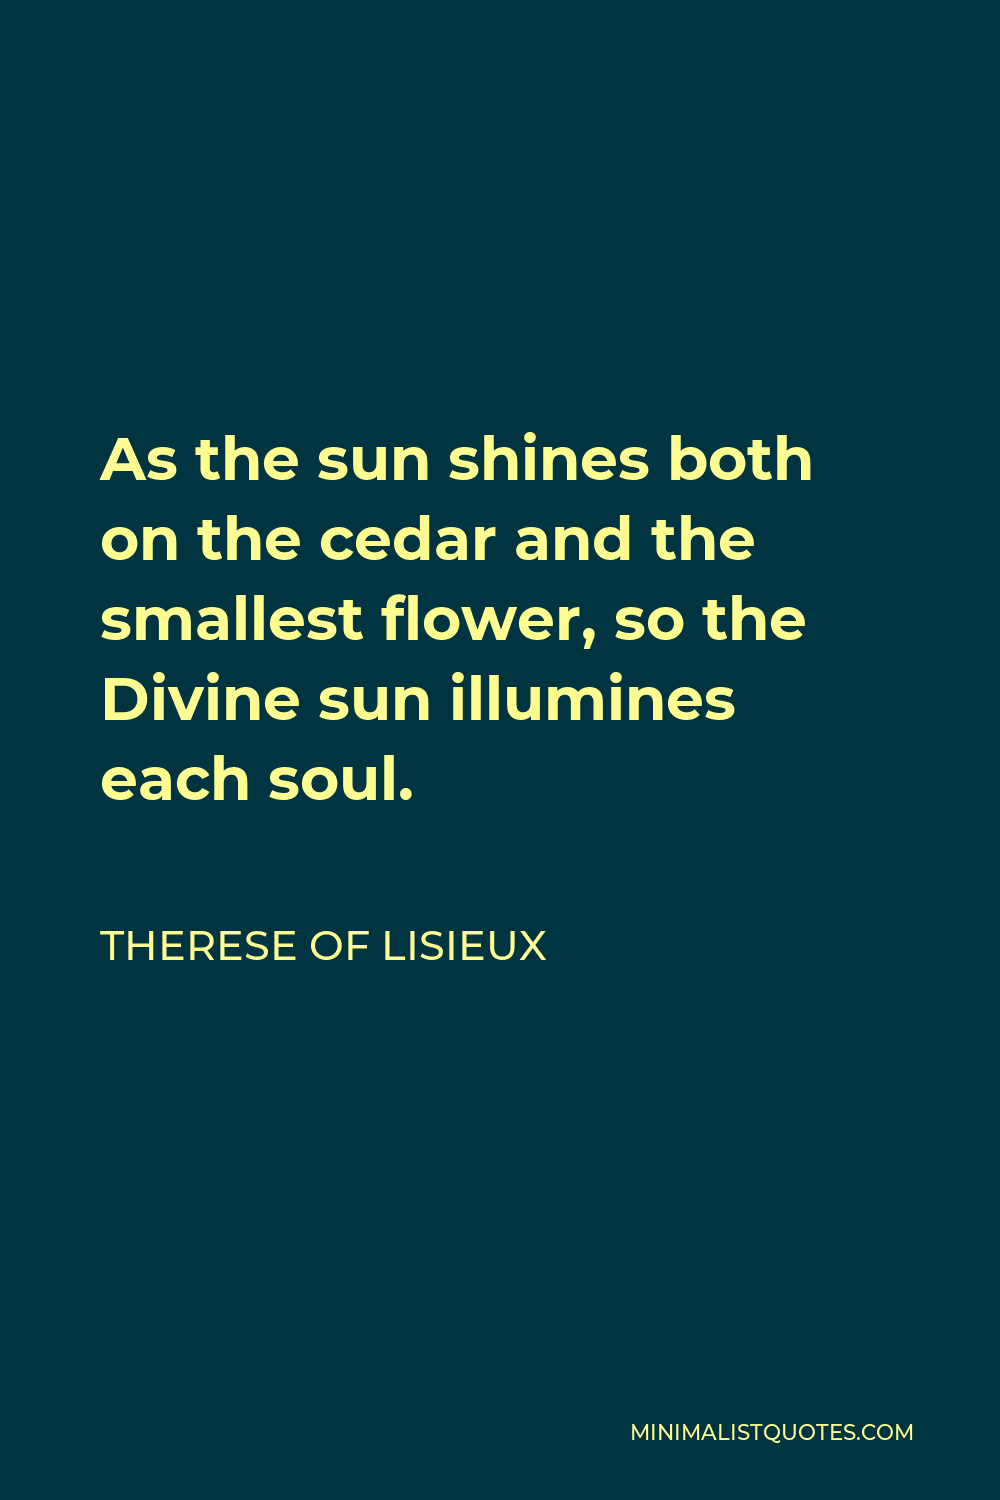 Therese of Lisieux Quote - As the sun shines both on the cedar and the smallest flower, so the Divine sun illumines each soul.